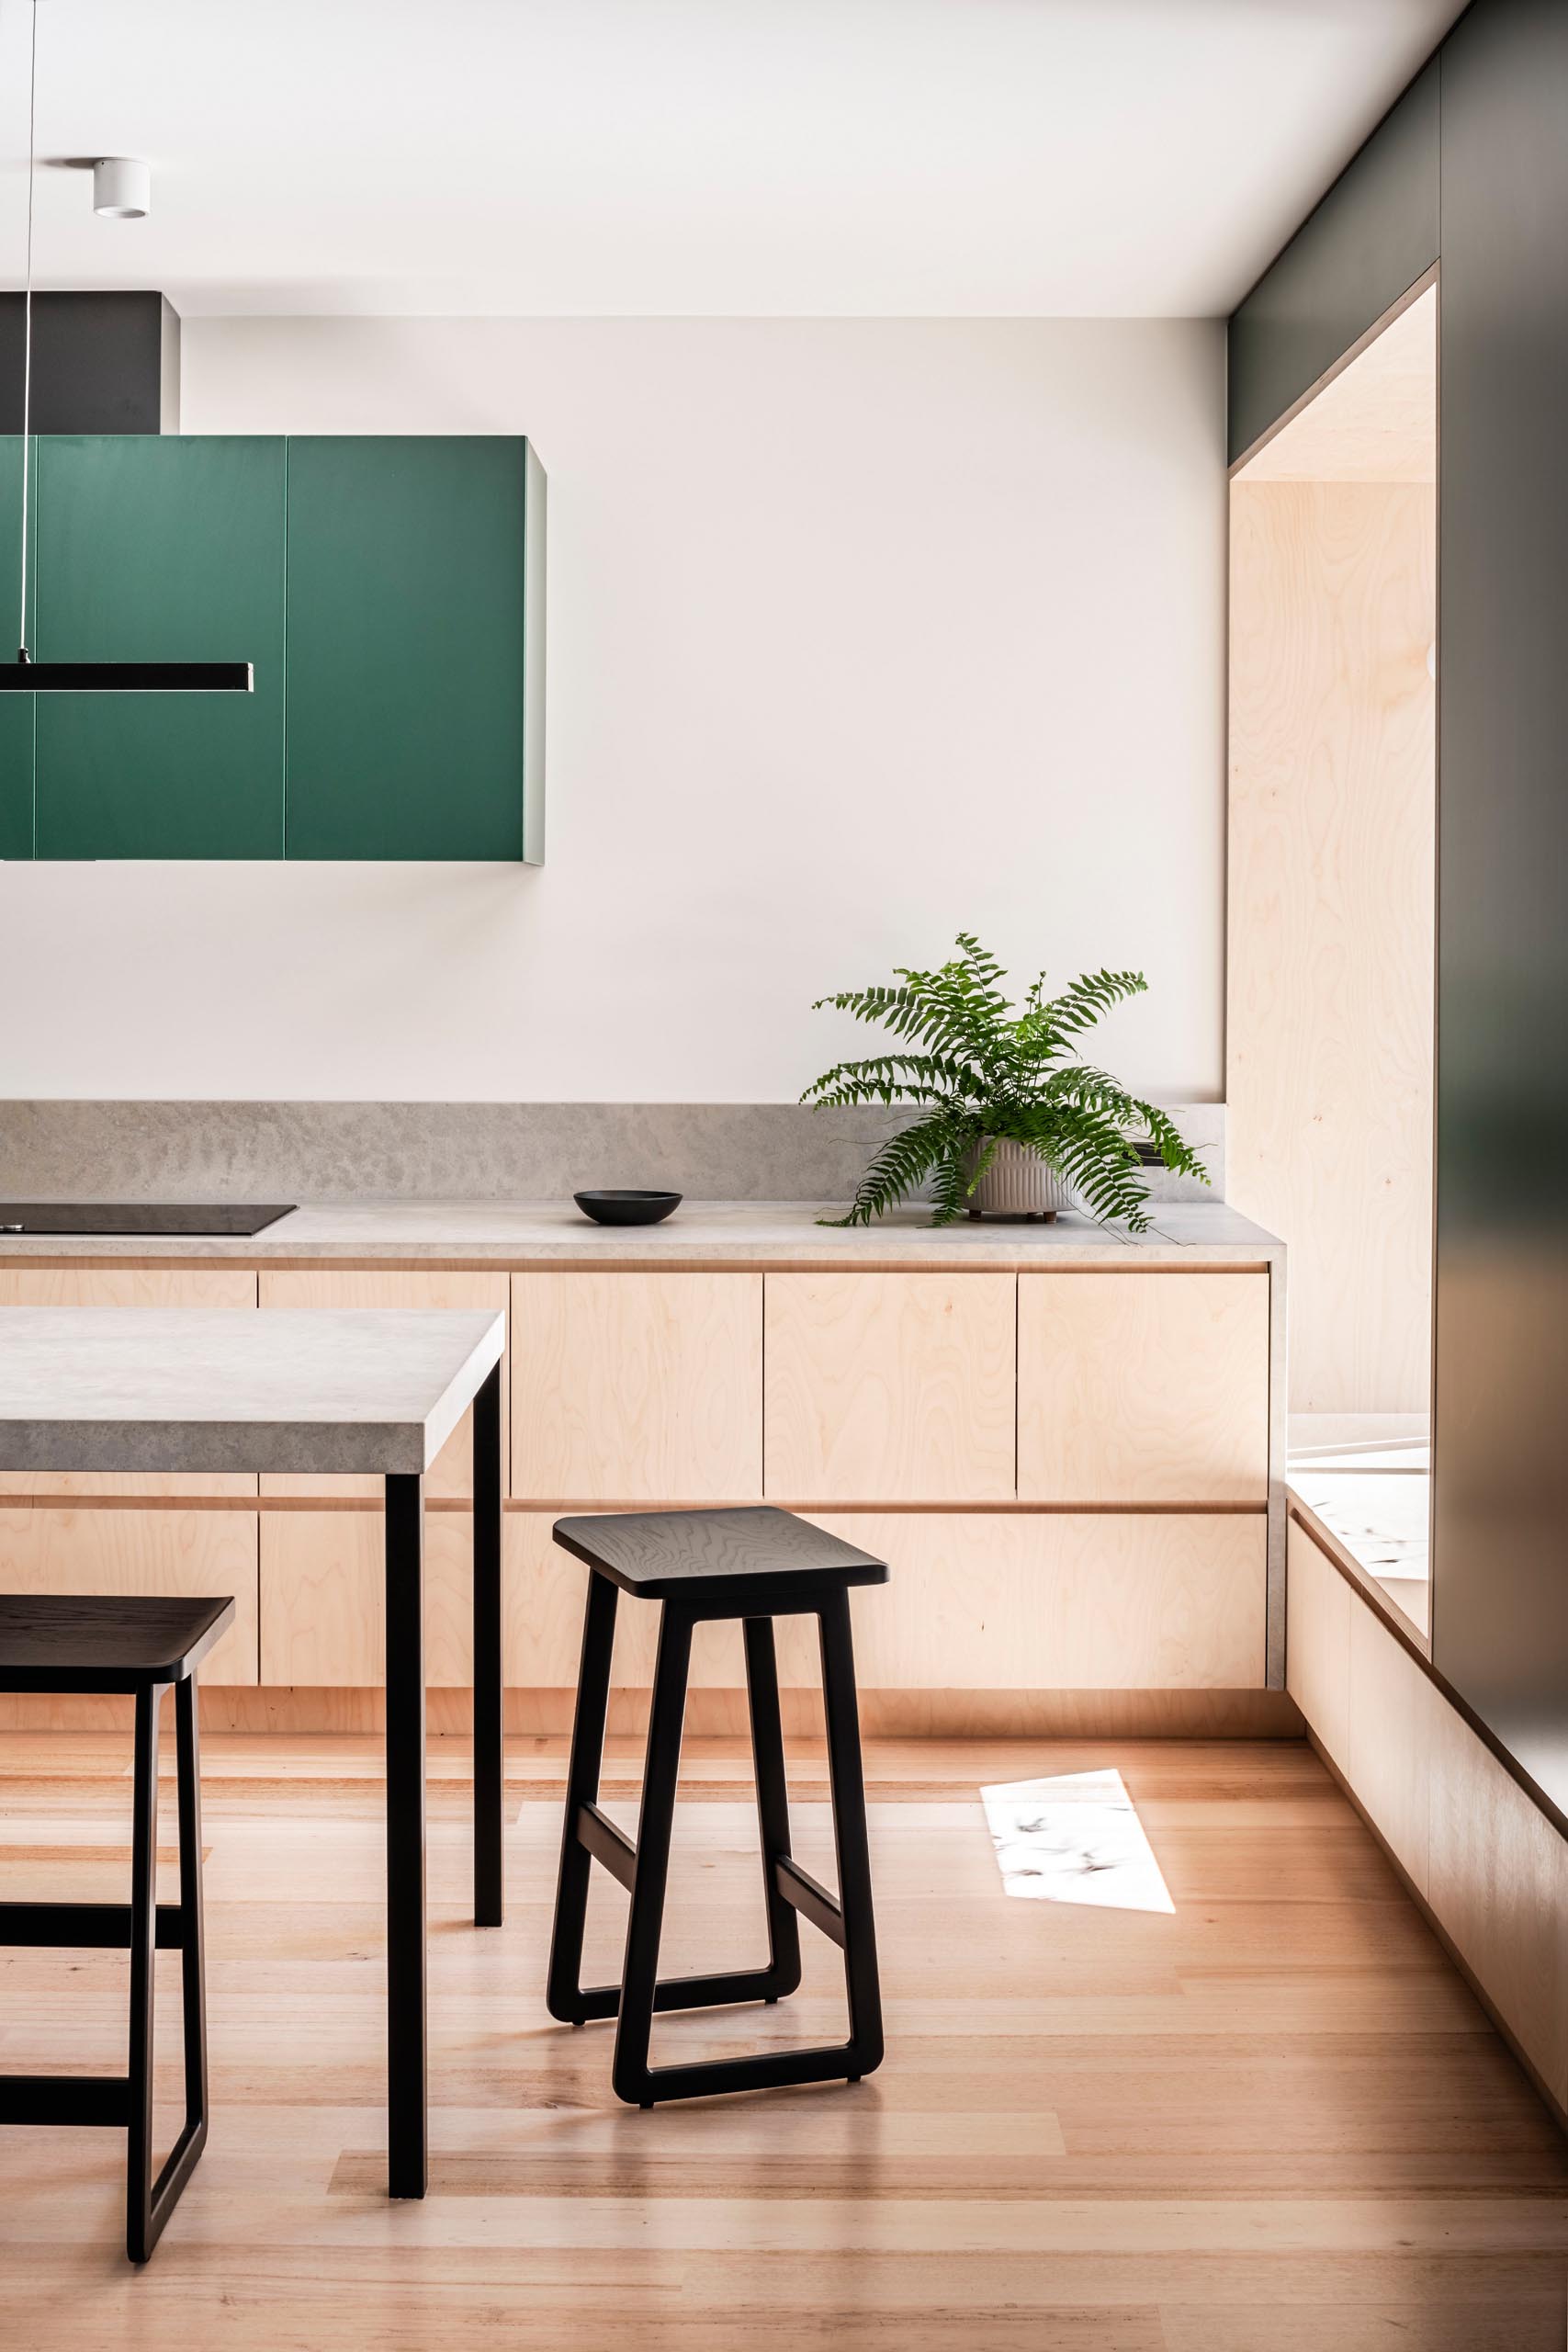 In this modern kitchen, dark green upper cabinets have been wood lower cabinets and concrete countertops.